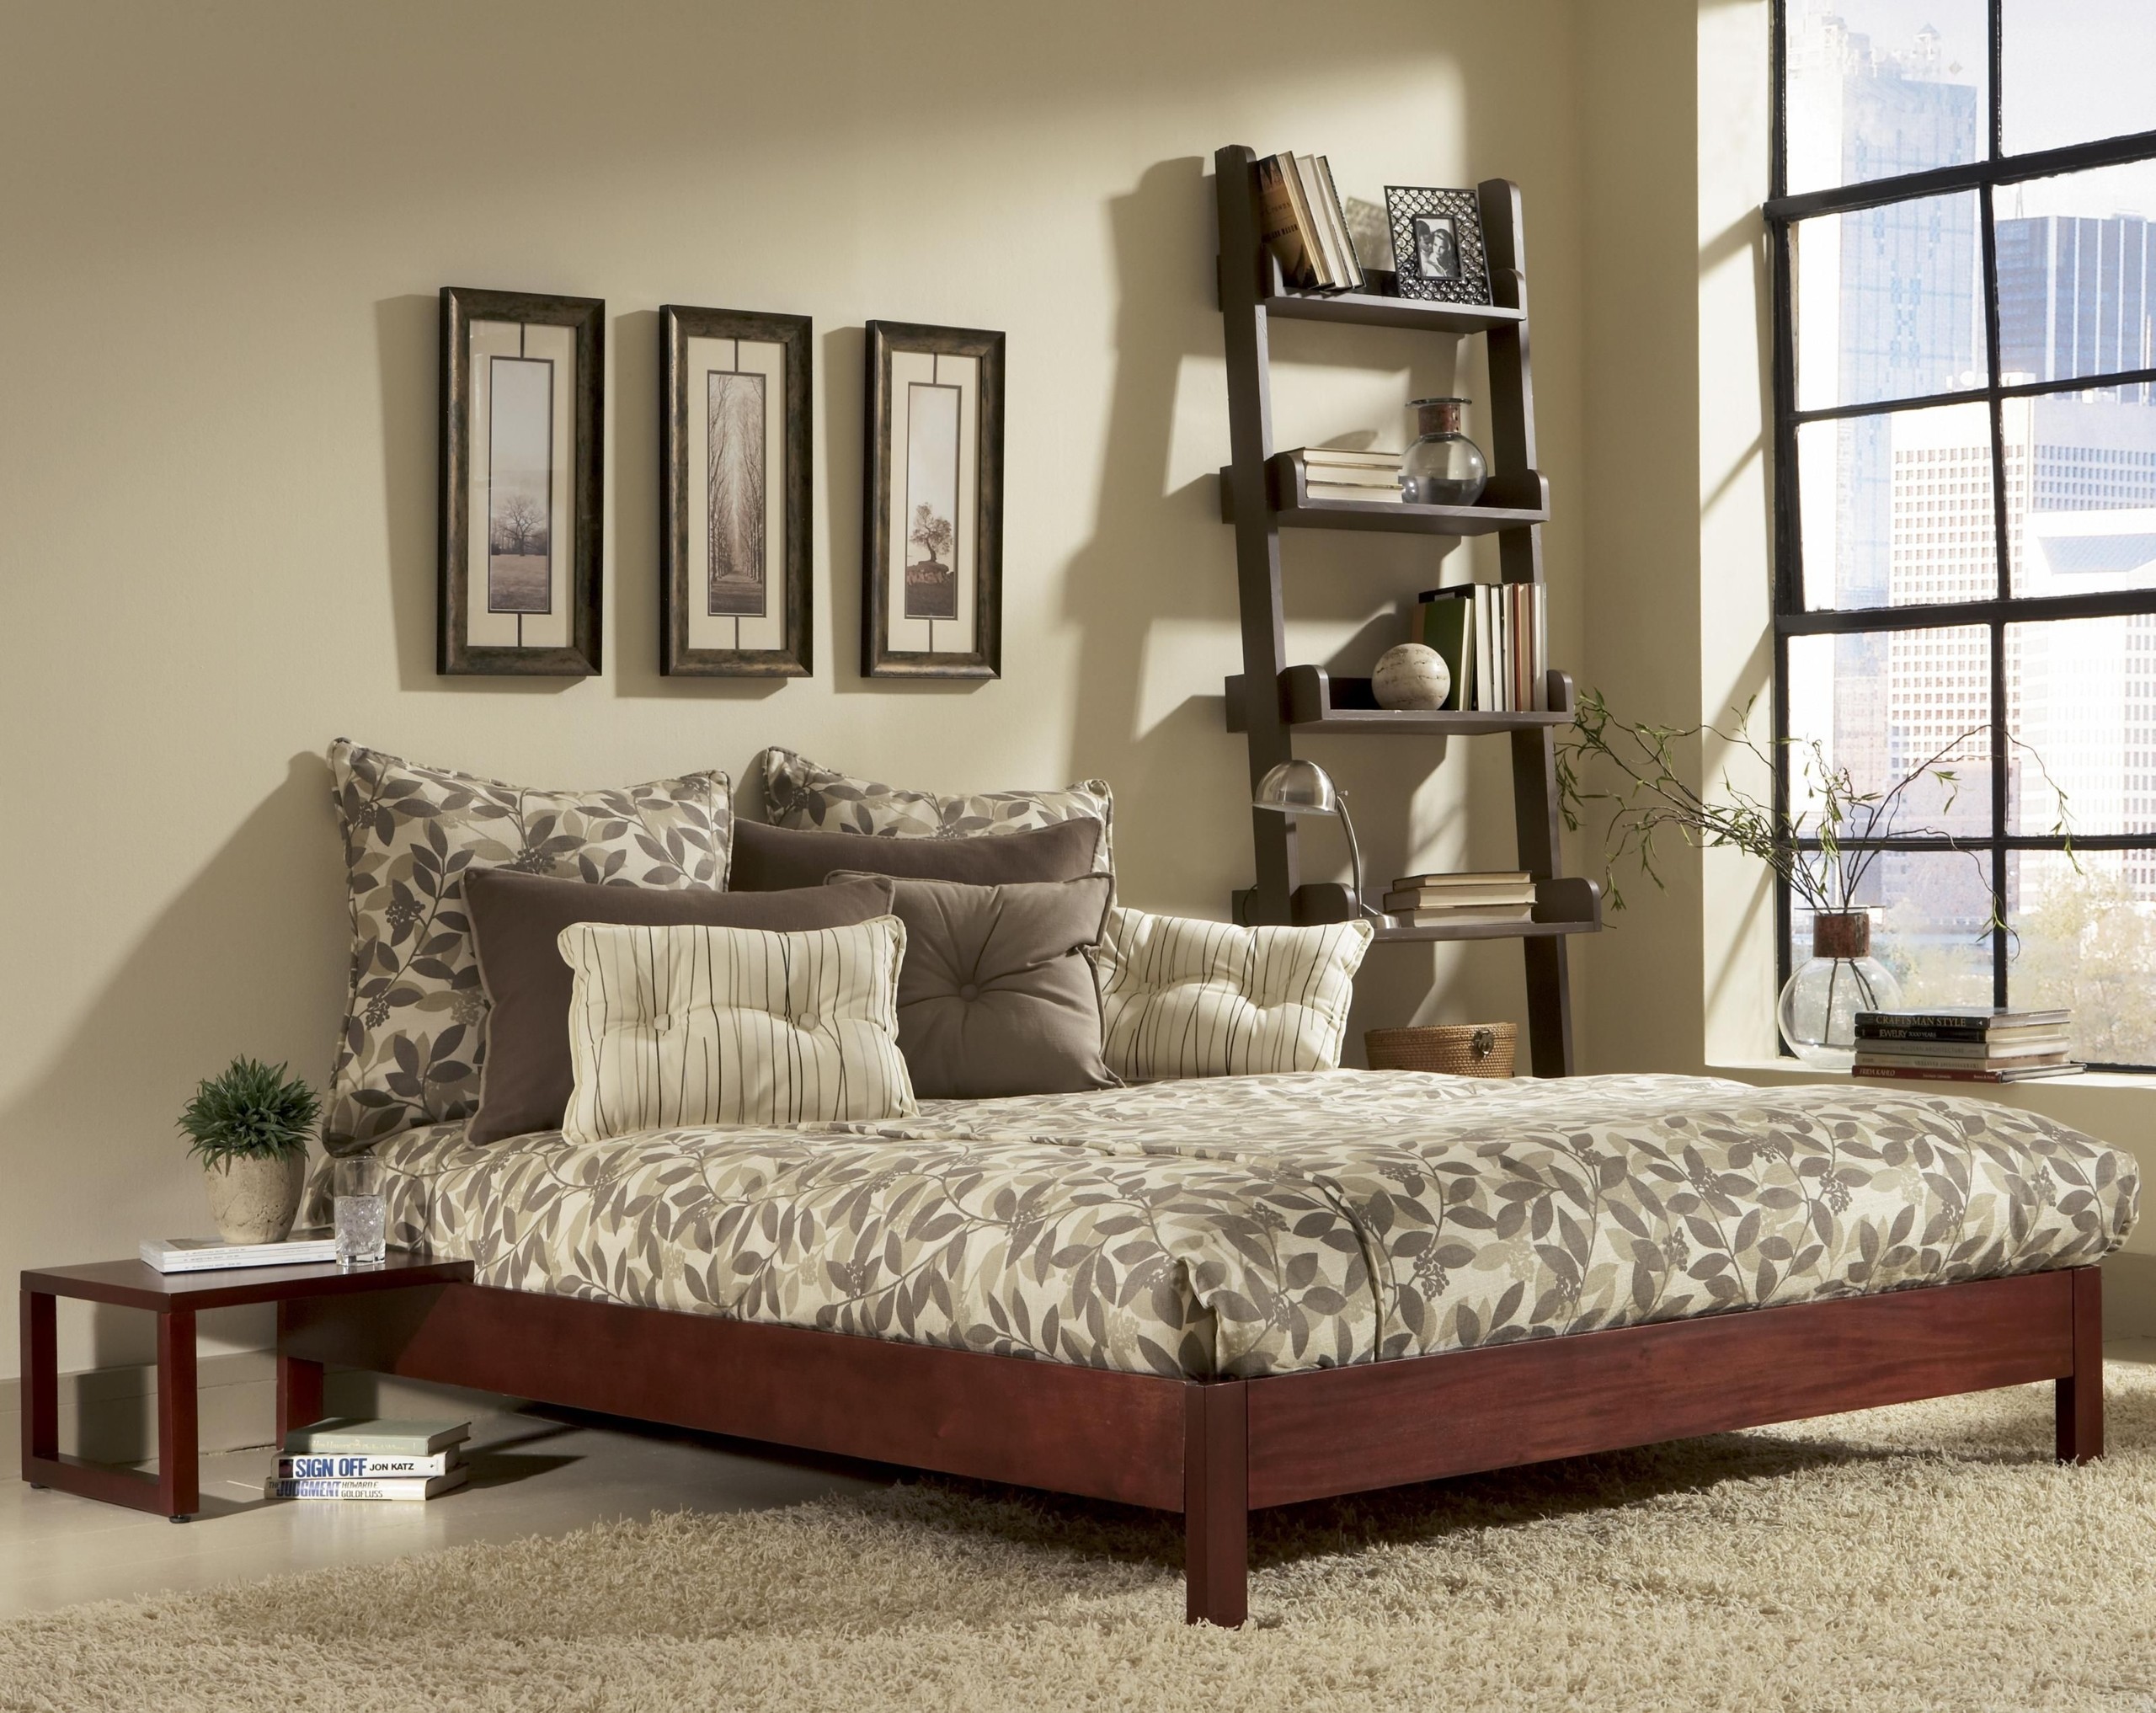 Low profile queen bed frame 25